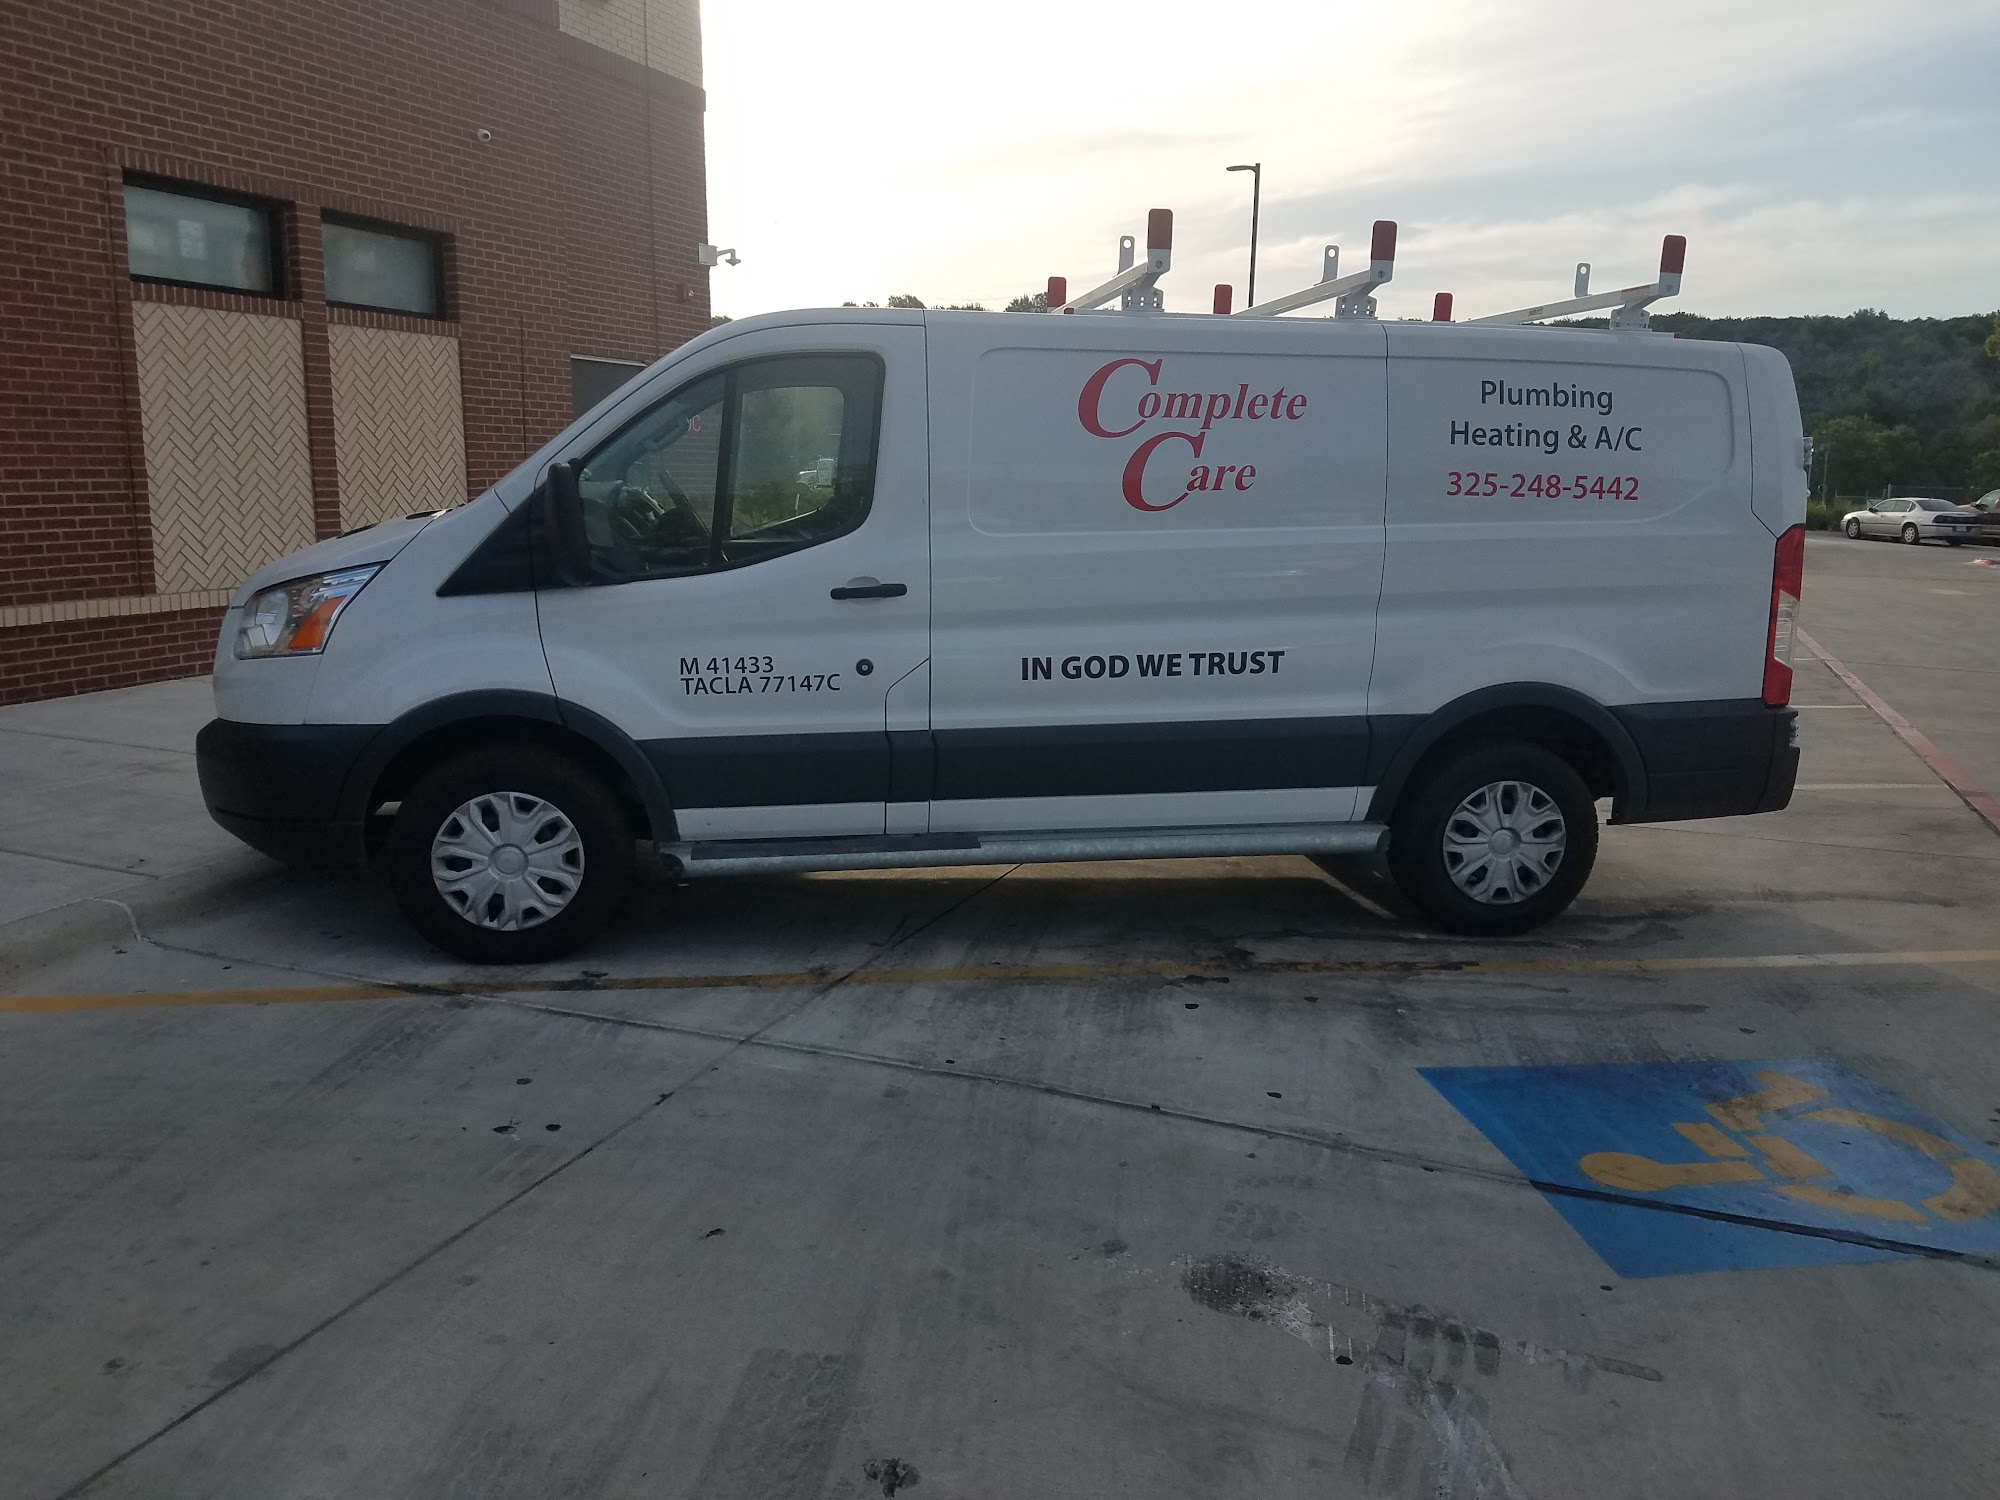 Complete Care Plumbing